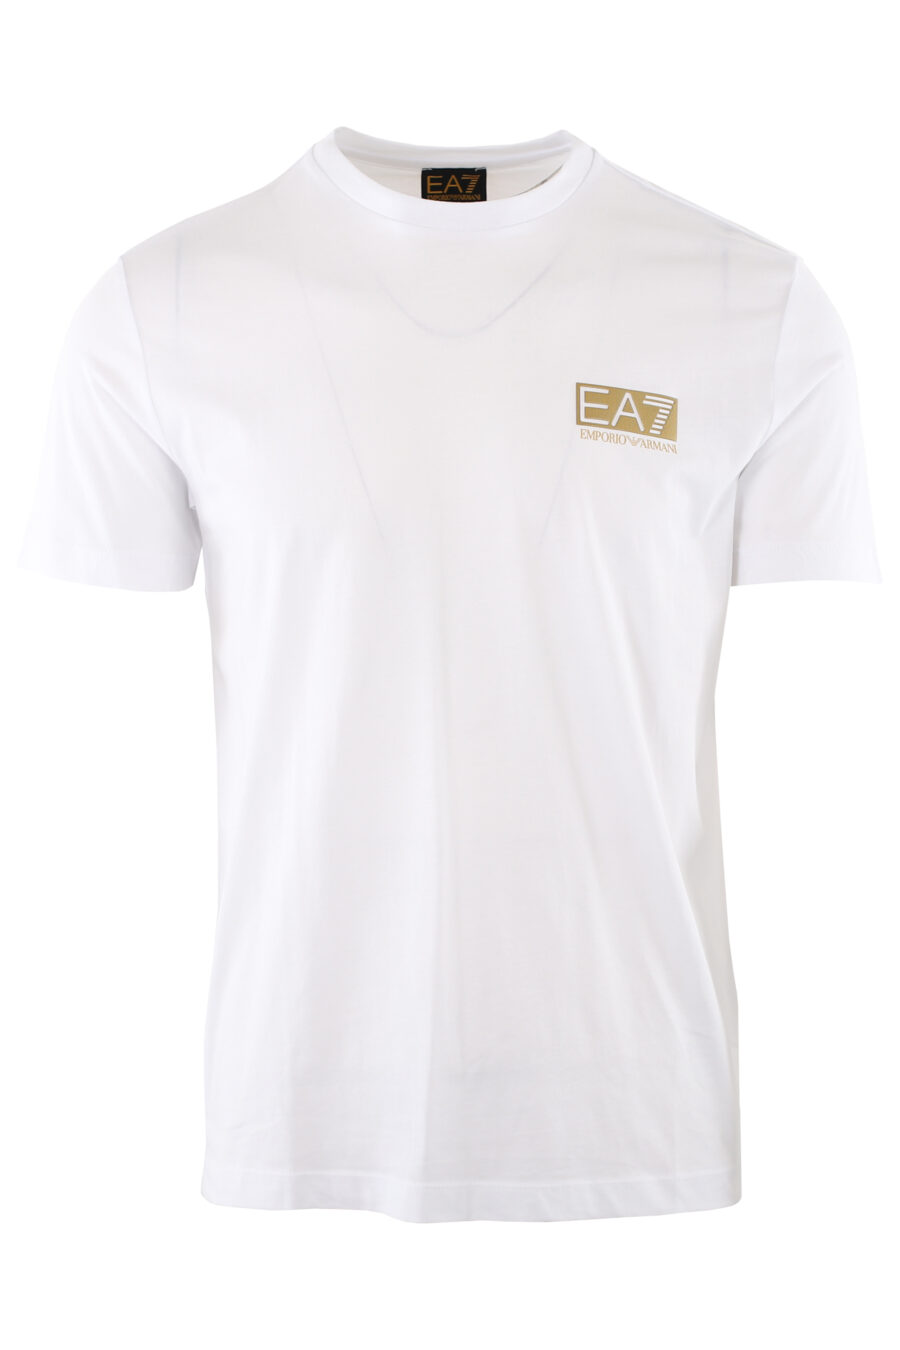 White T-shirt with gold logo "lux identity" - IMG 7416